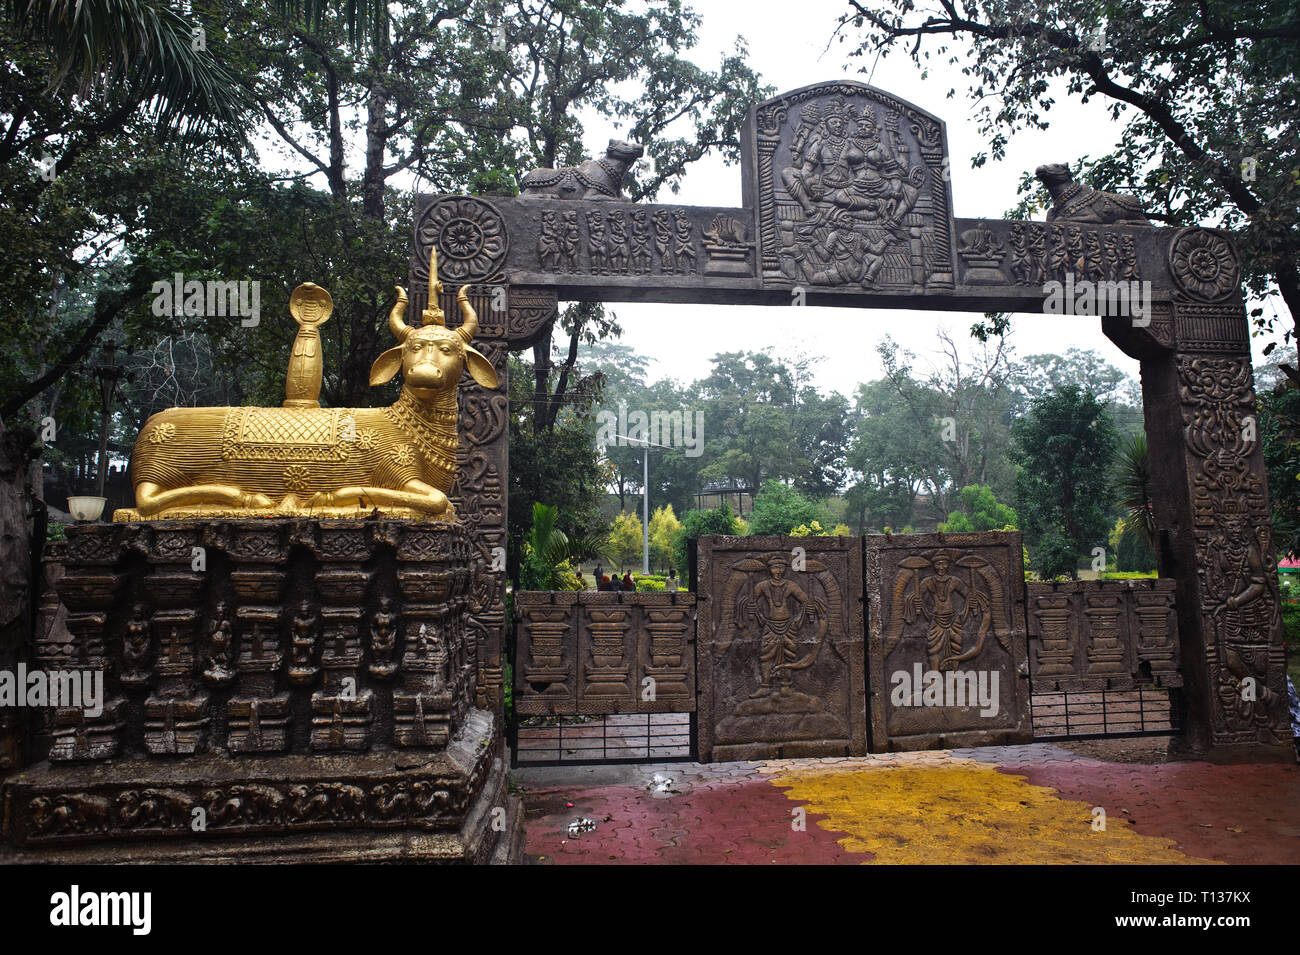 Entrance of a public park  ( India) The golden sculpture is representing the bull Nandi, the mount of the hindu god Shiva. Stock Photo